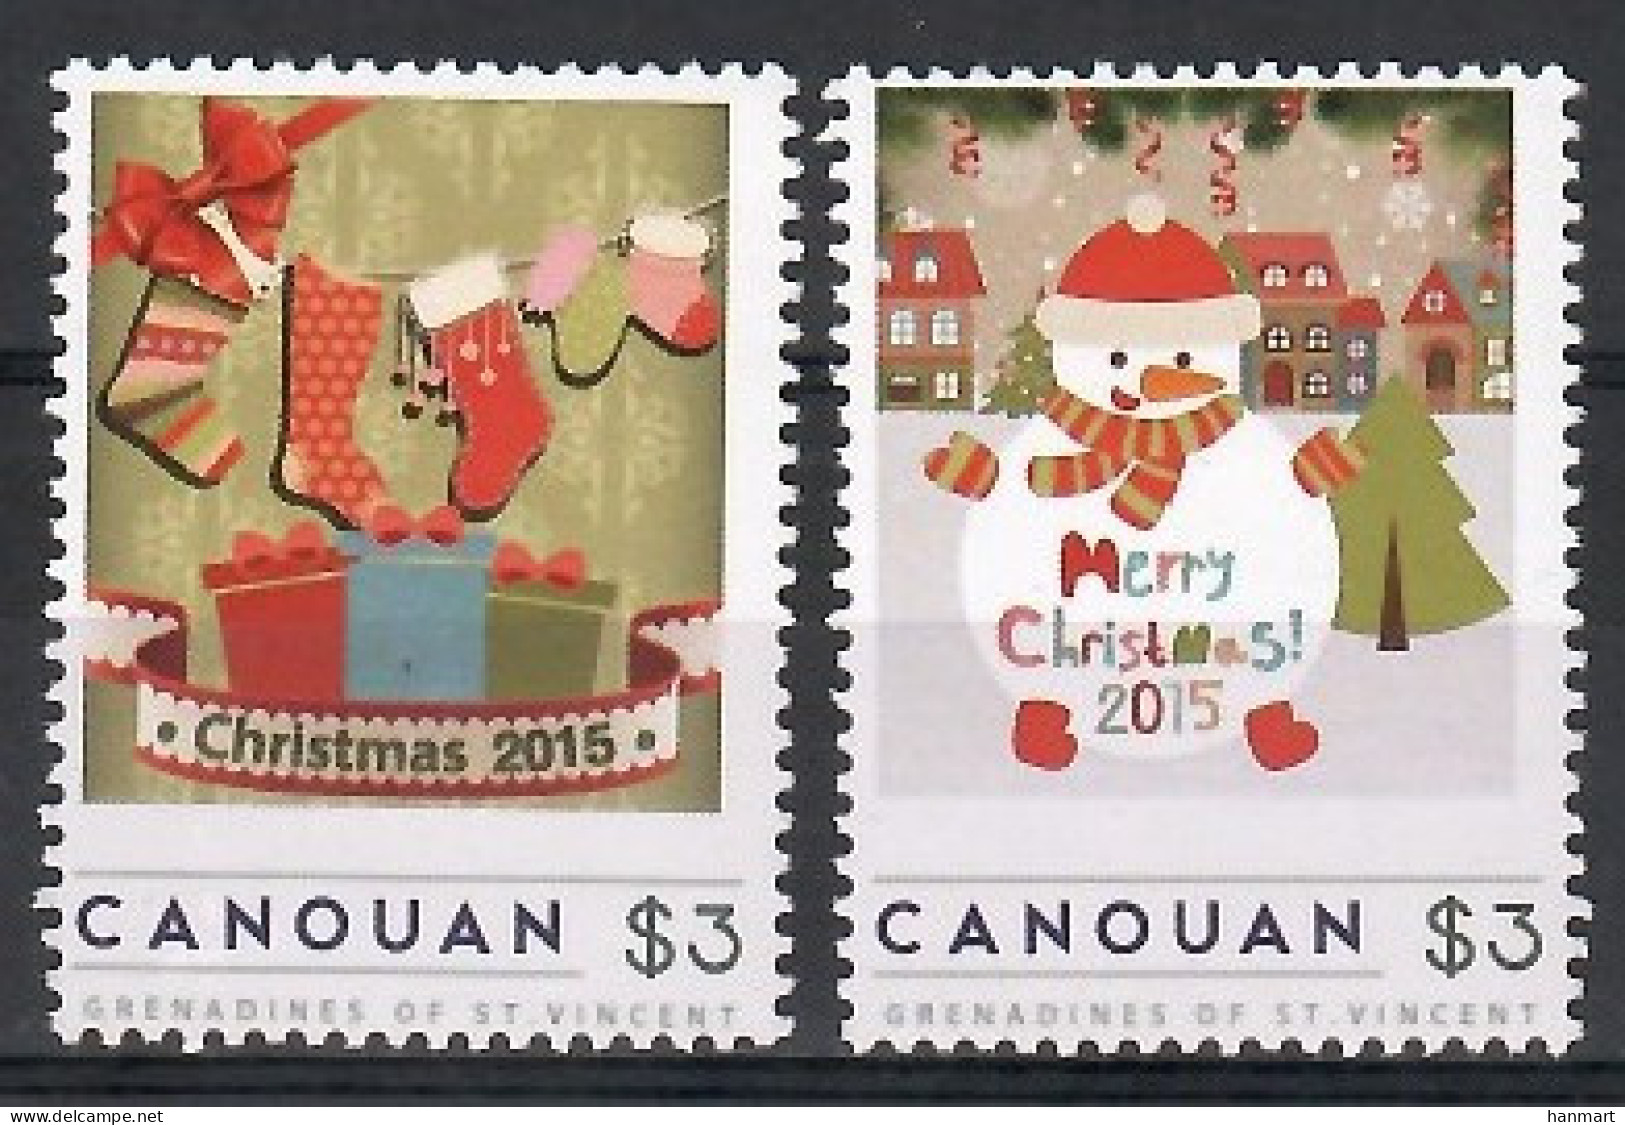 Grenadines Of St. Vincent, Canouan 2015 Mi Per MNH  (ZS2 SVCper2015) - Christmas